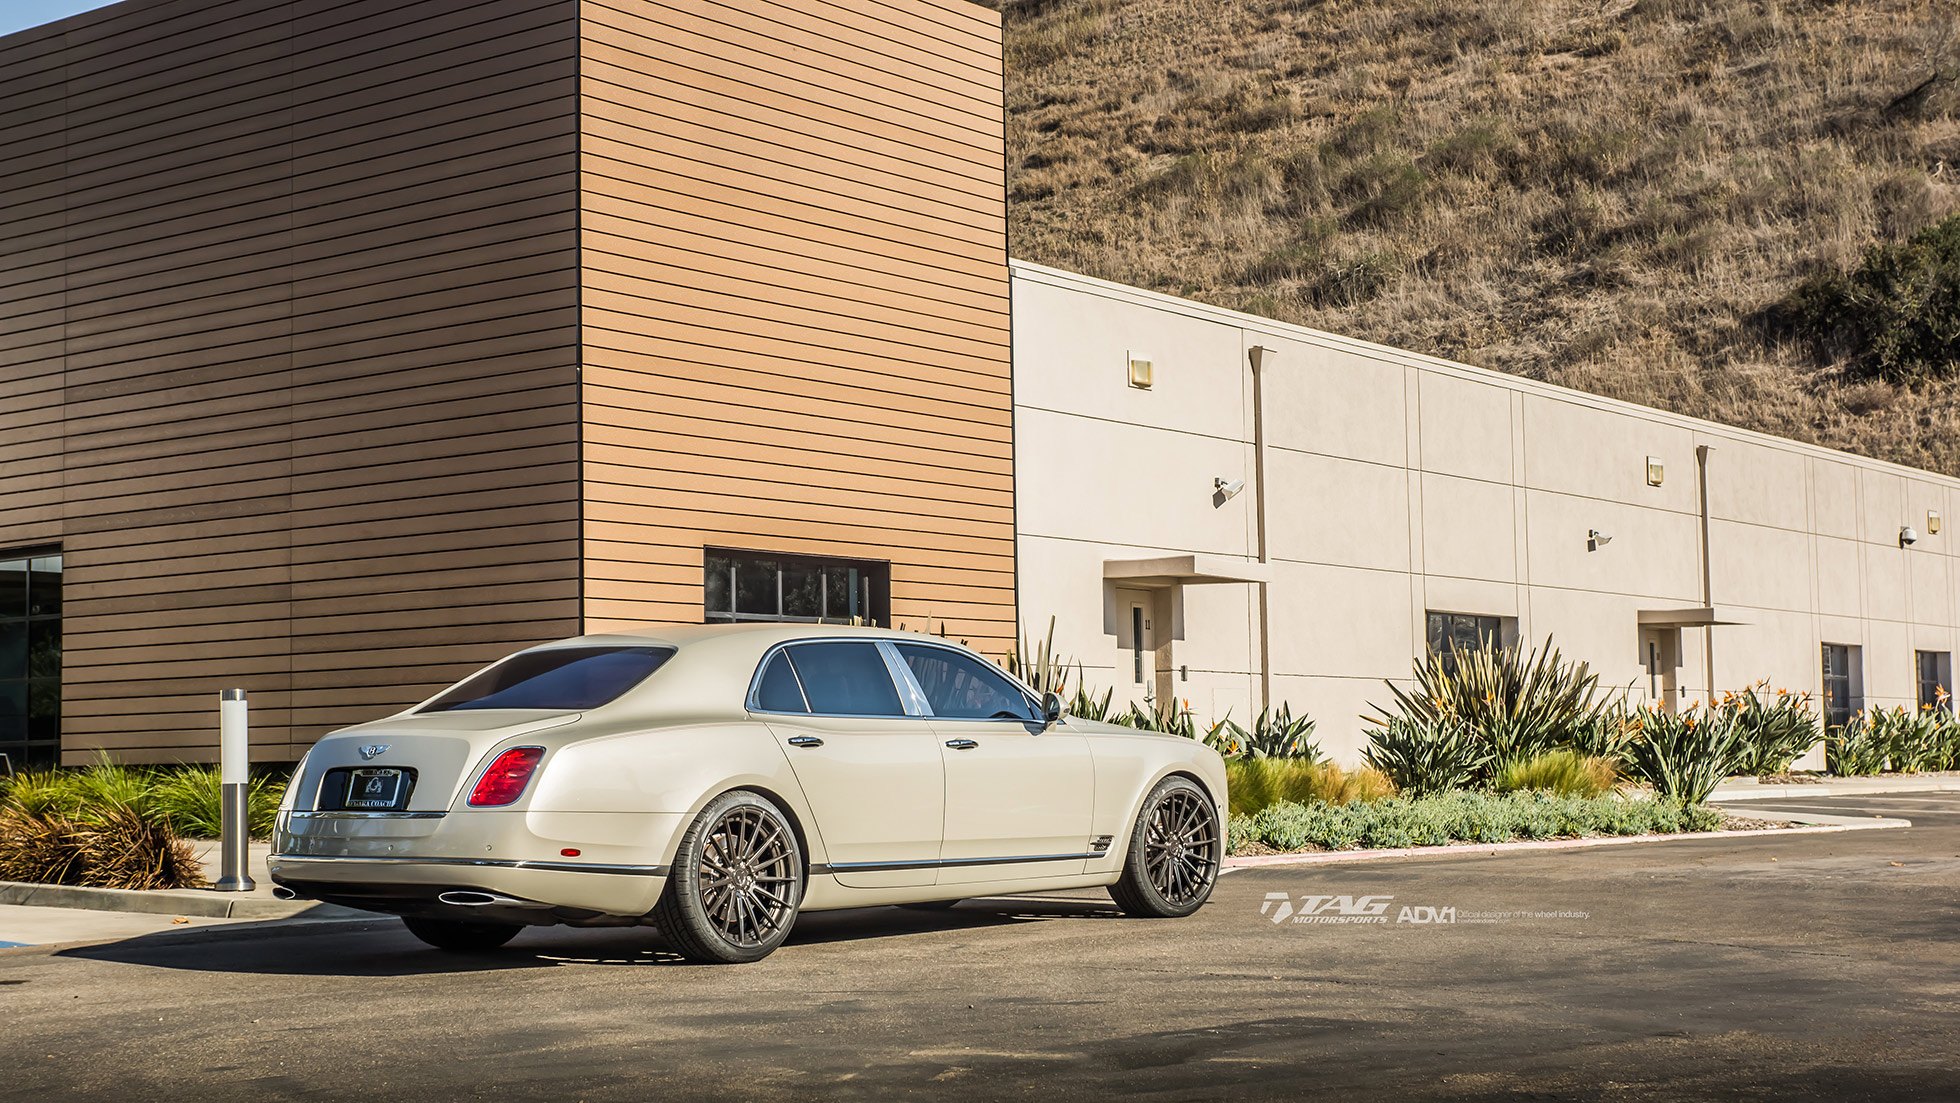 Aftermarket Rear Diffuser on White Bentley Mulsanne - Photo by ADV.1